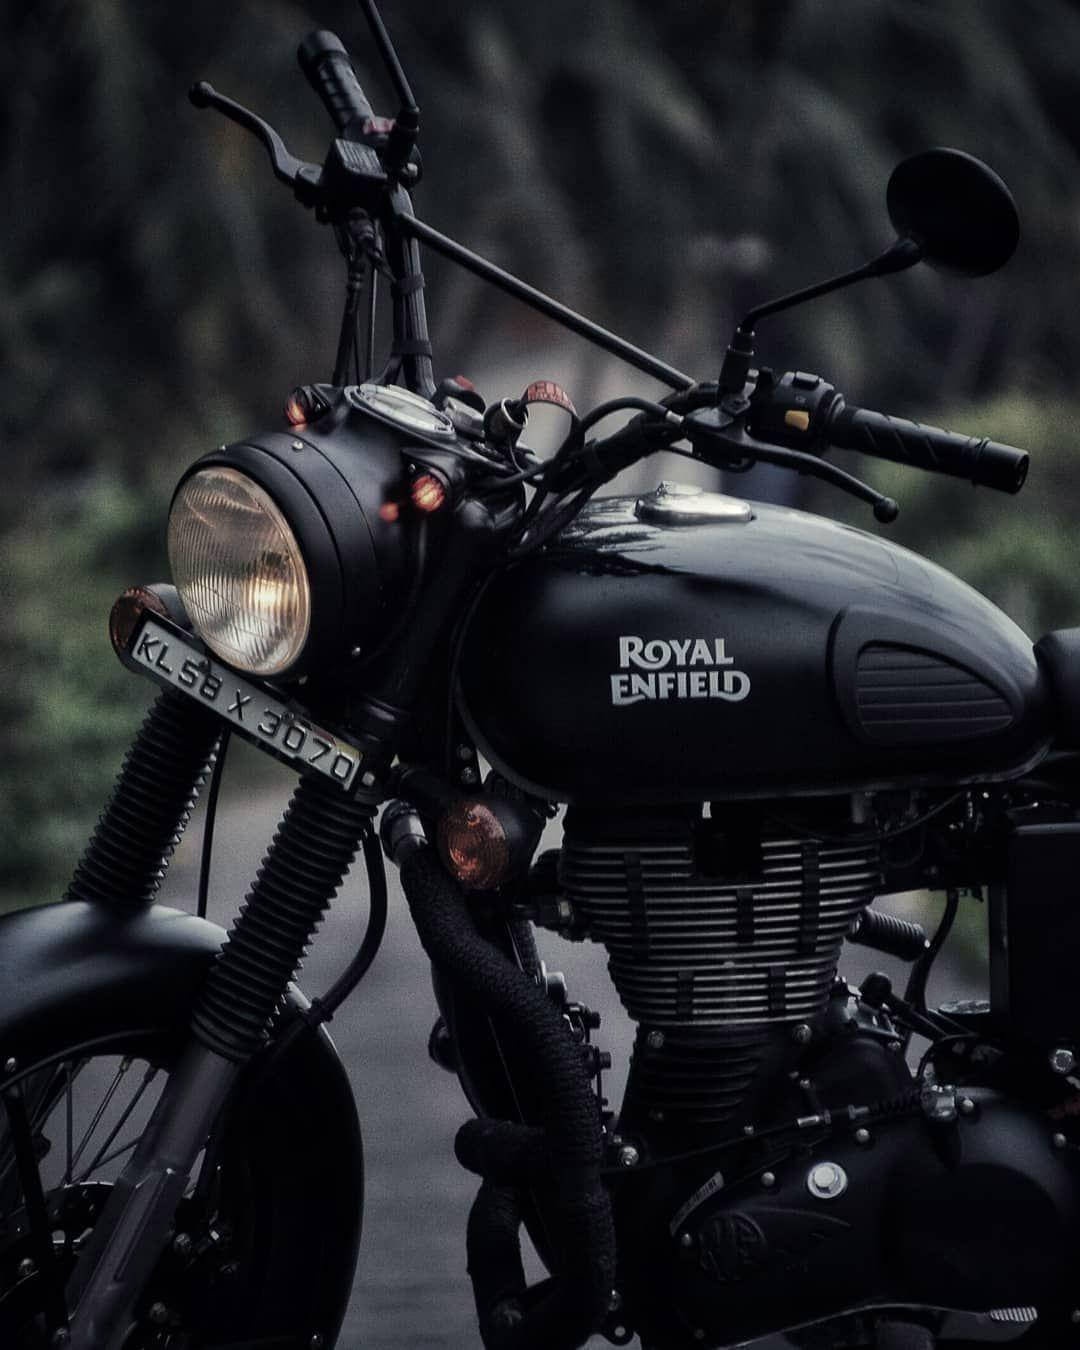 Caption: Majestic Royal Enfield In High Definition Wallpaper